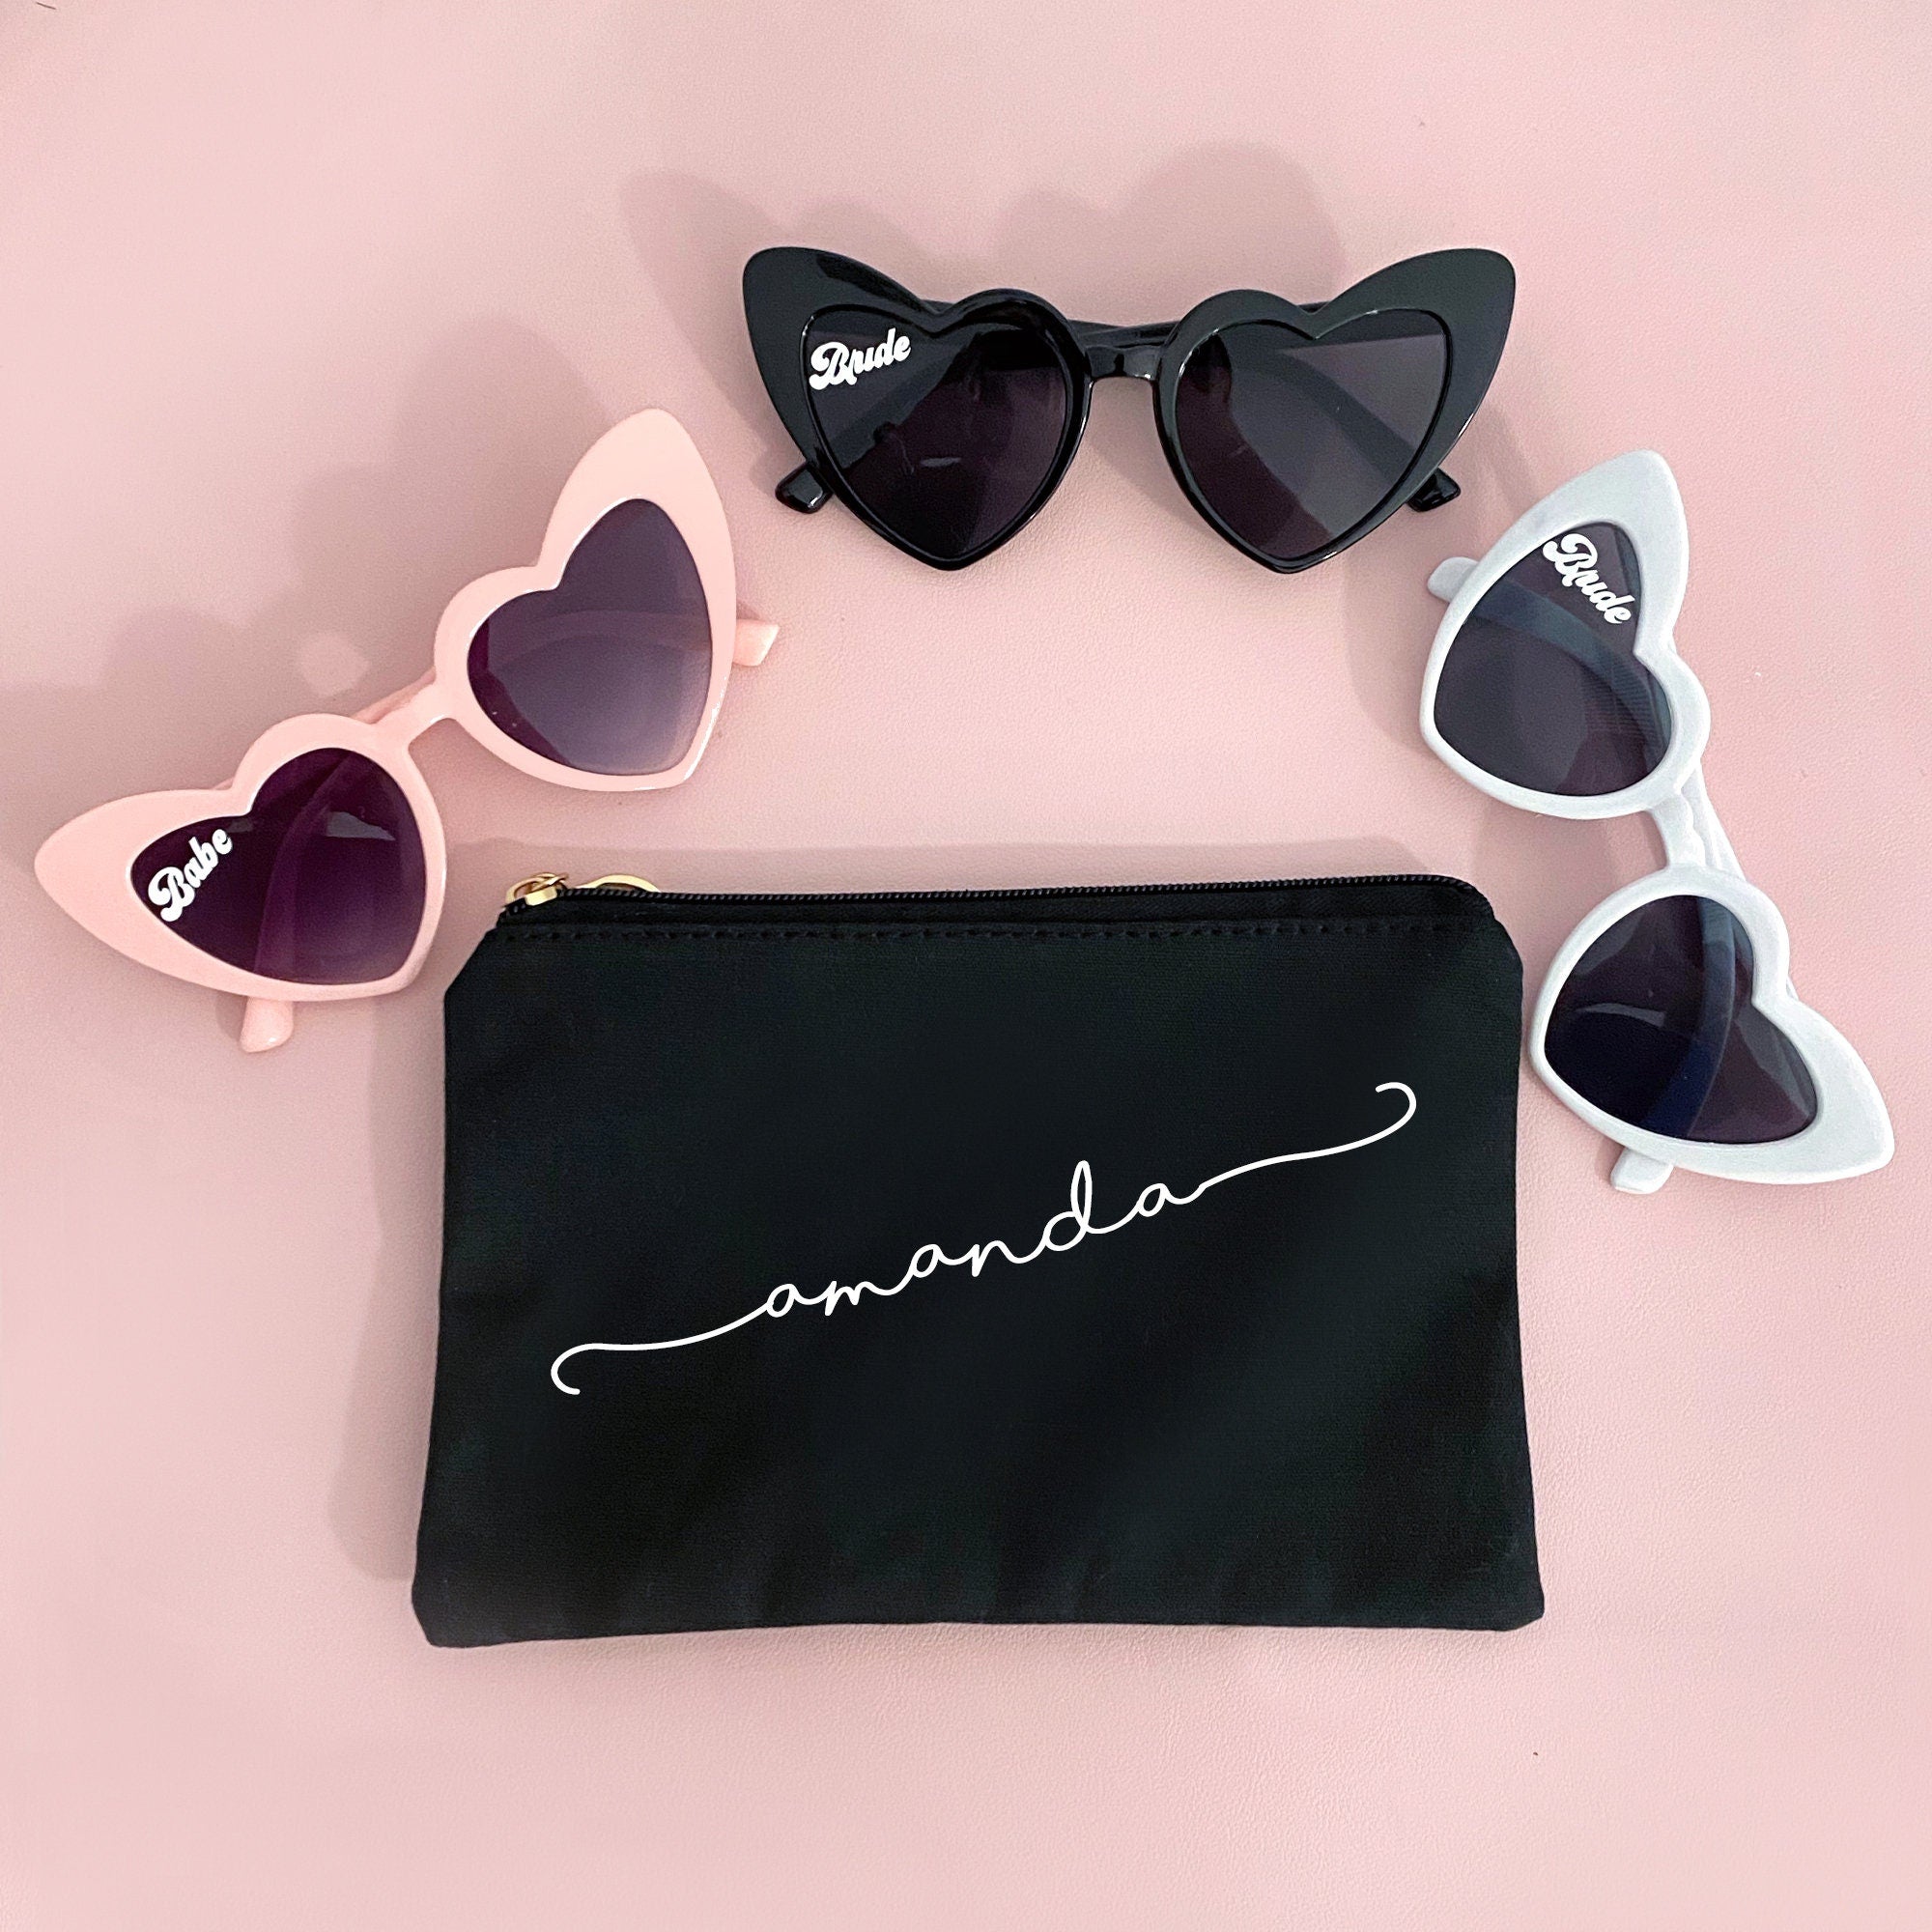 Custom Name Bag - Galentines Day Gifts - Personalizable Makeup Bag - Cute Valentines Day Gifts for Her - Gifts for Her